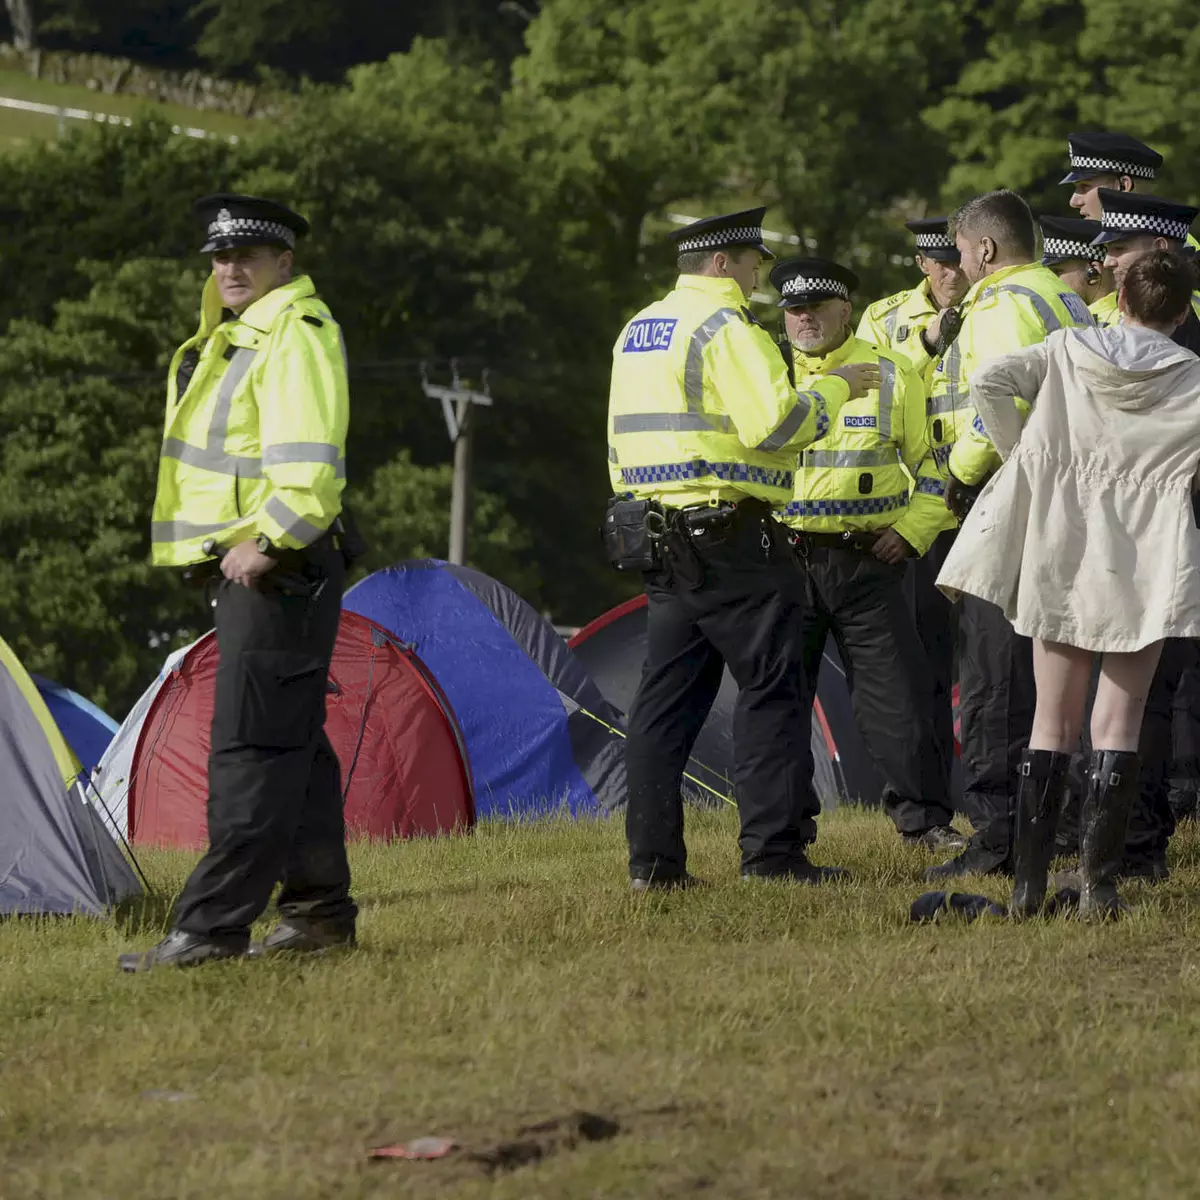 A Man And Woman Have Died At T In The Park Festival